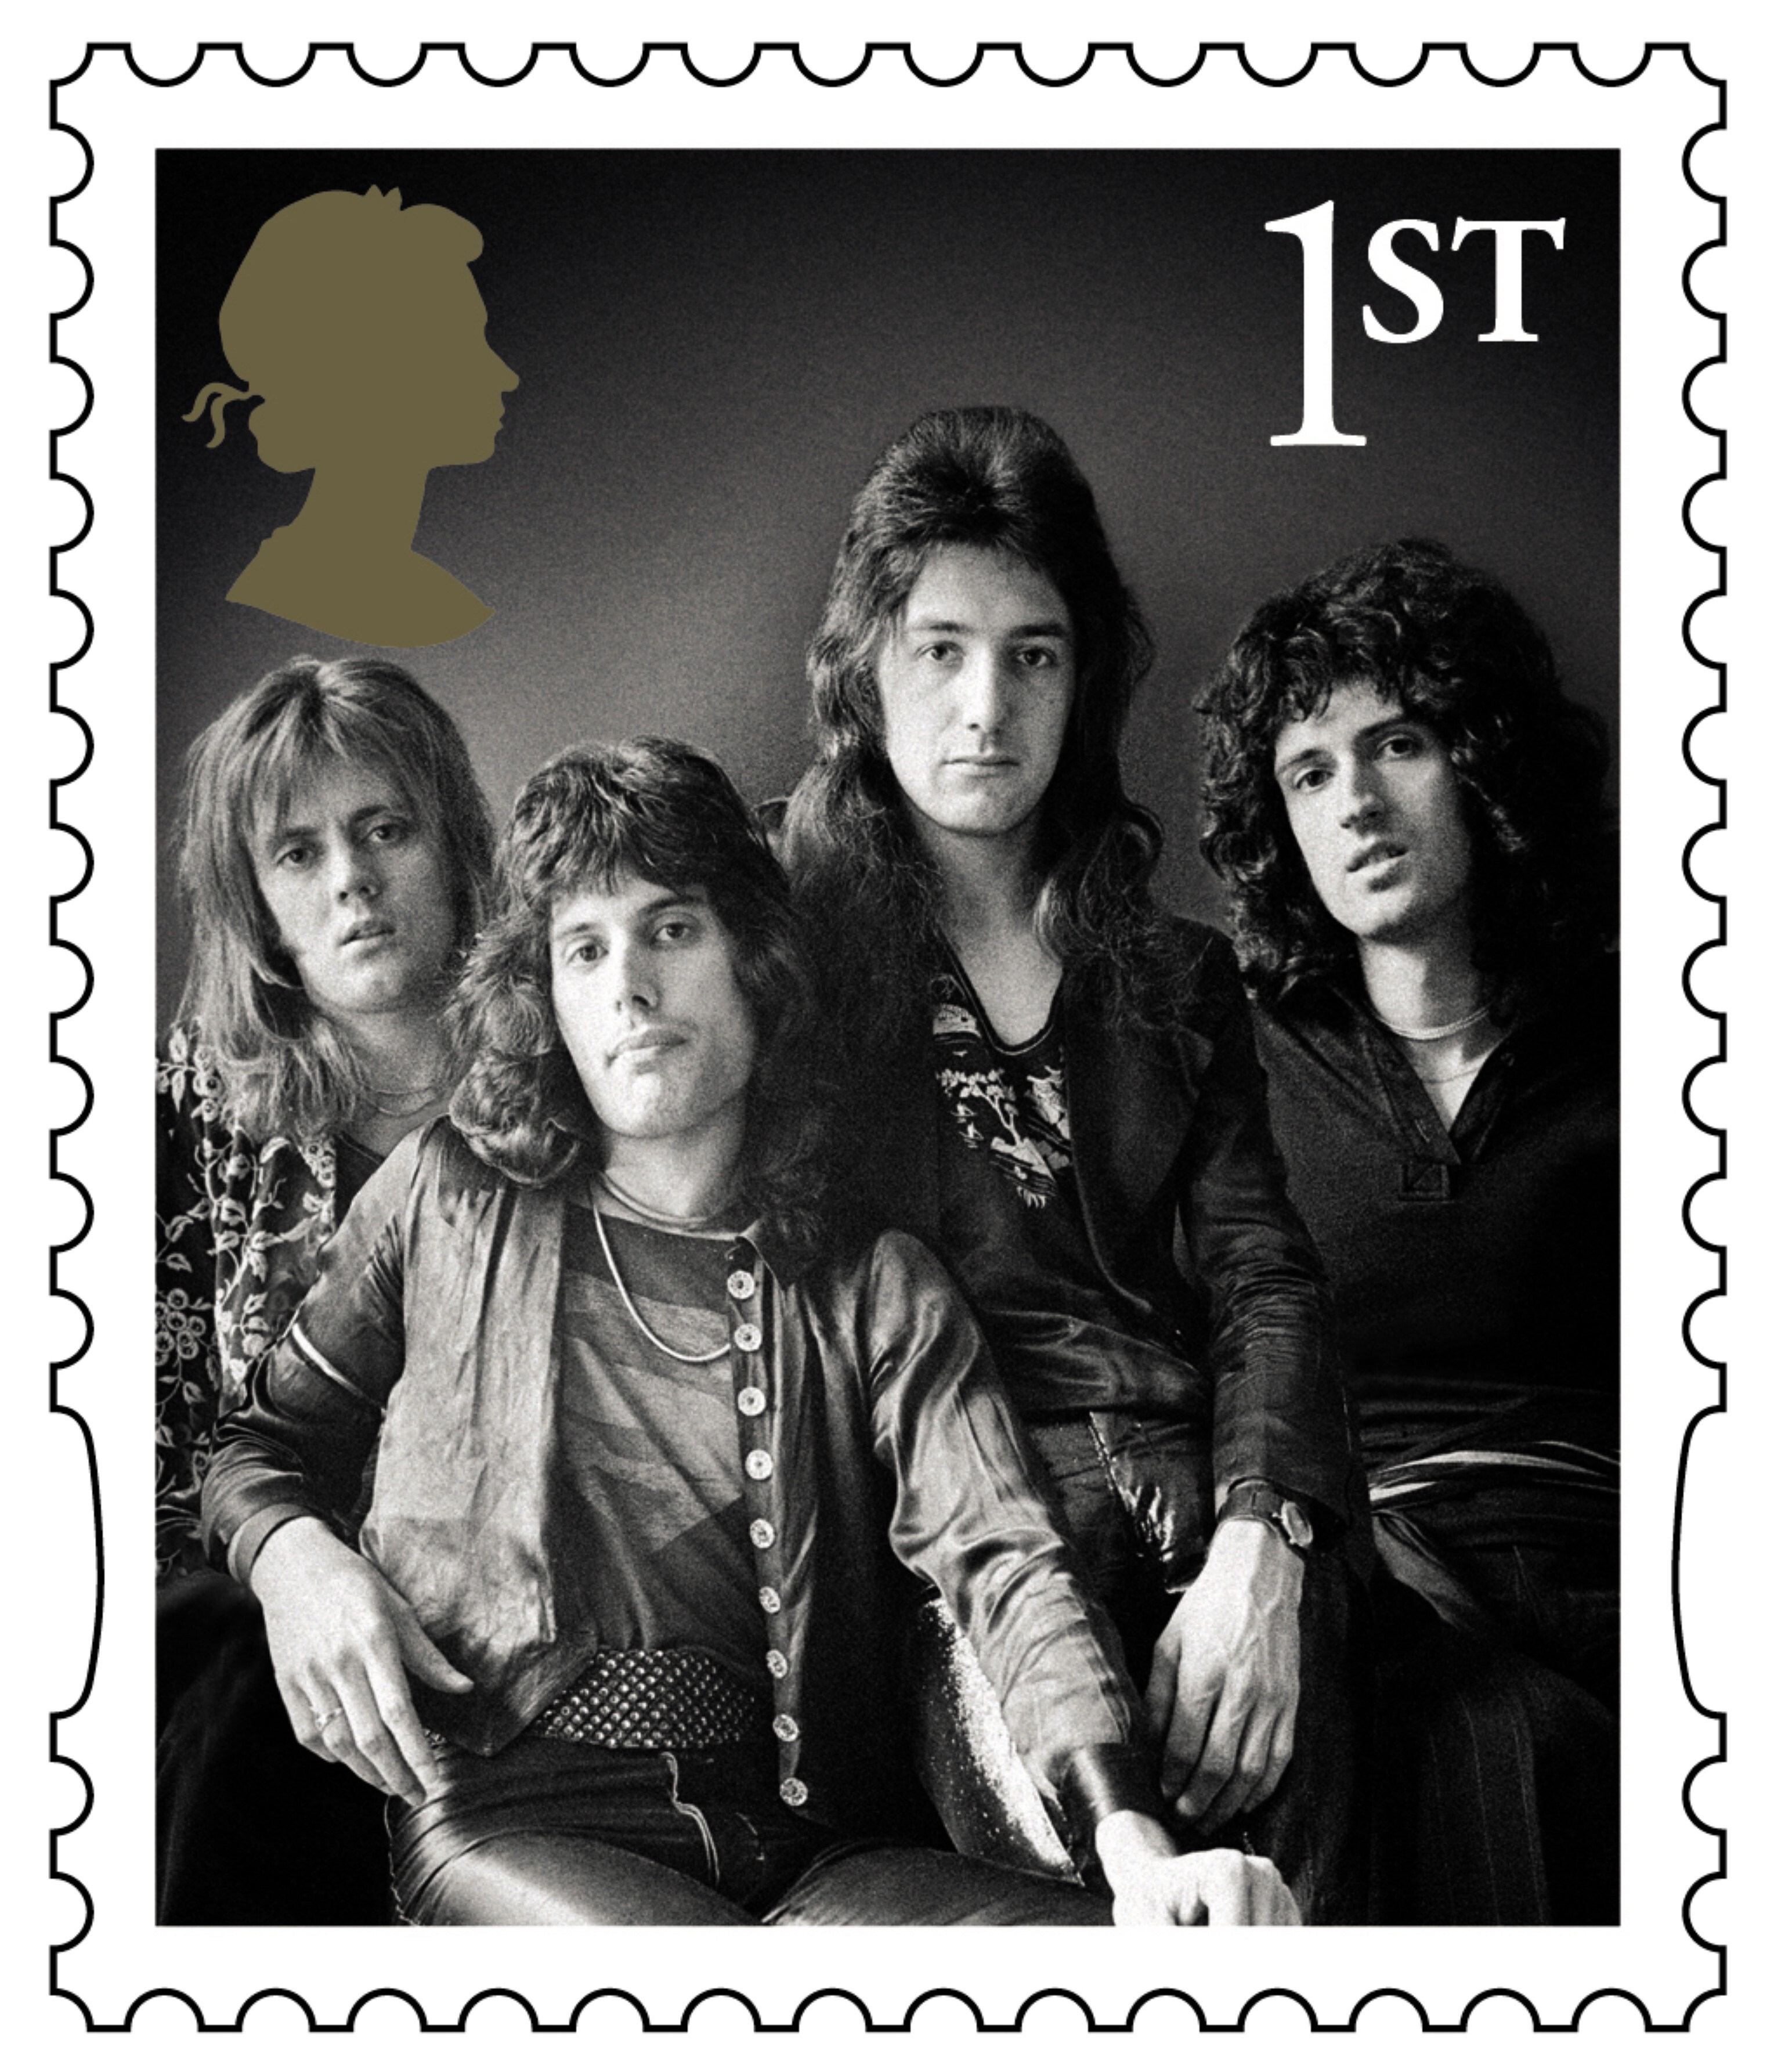 Queen postage stamps